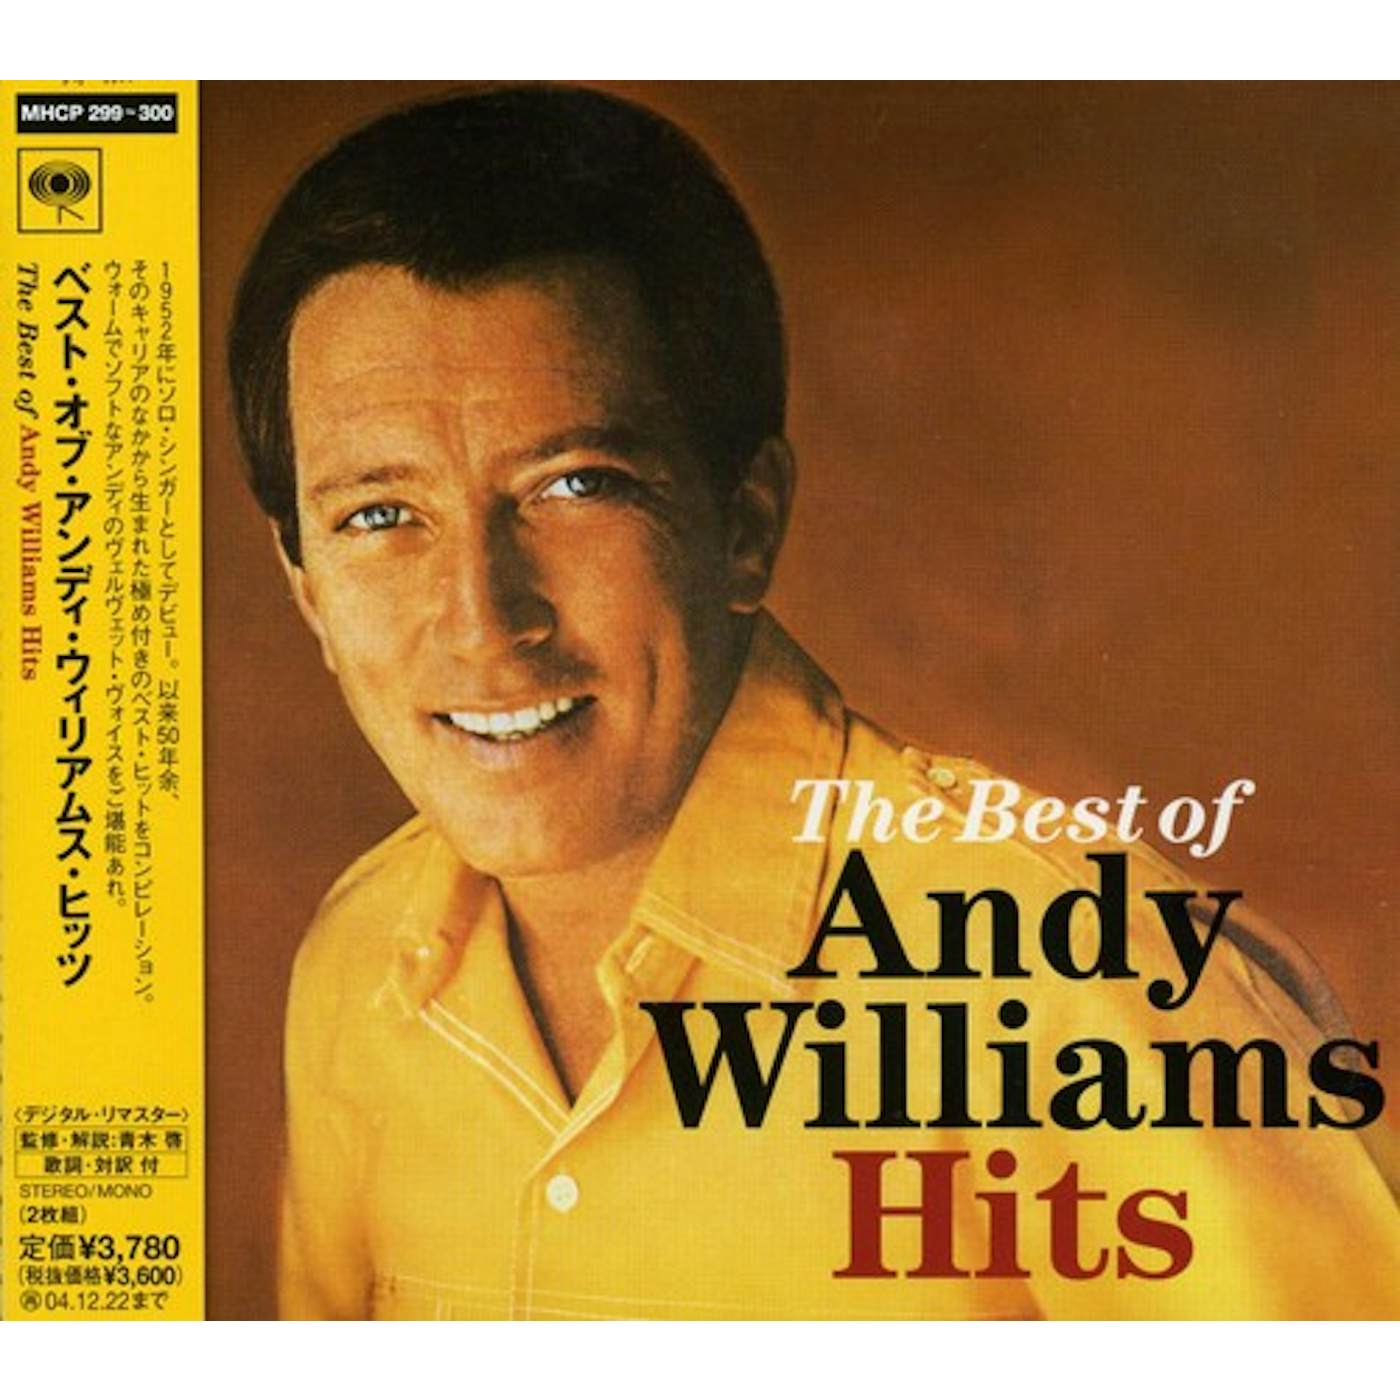 BEST OF ANDY WILLIAMS HITS CD